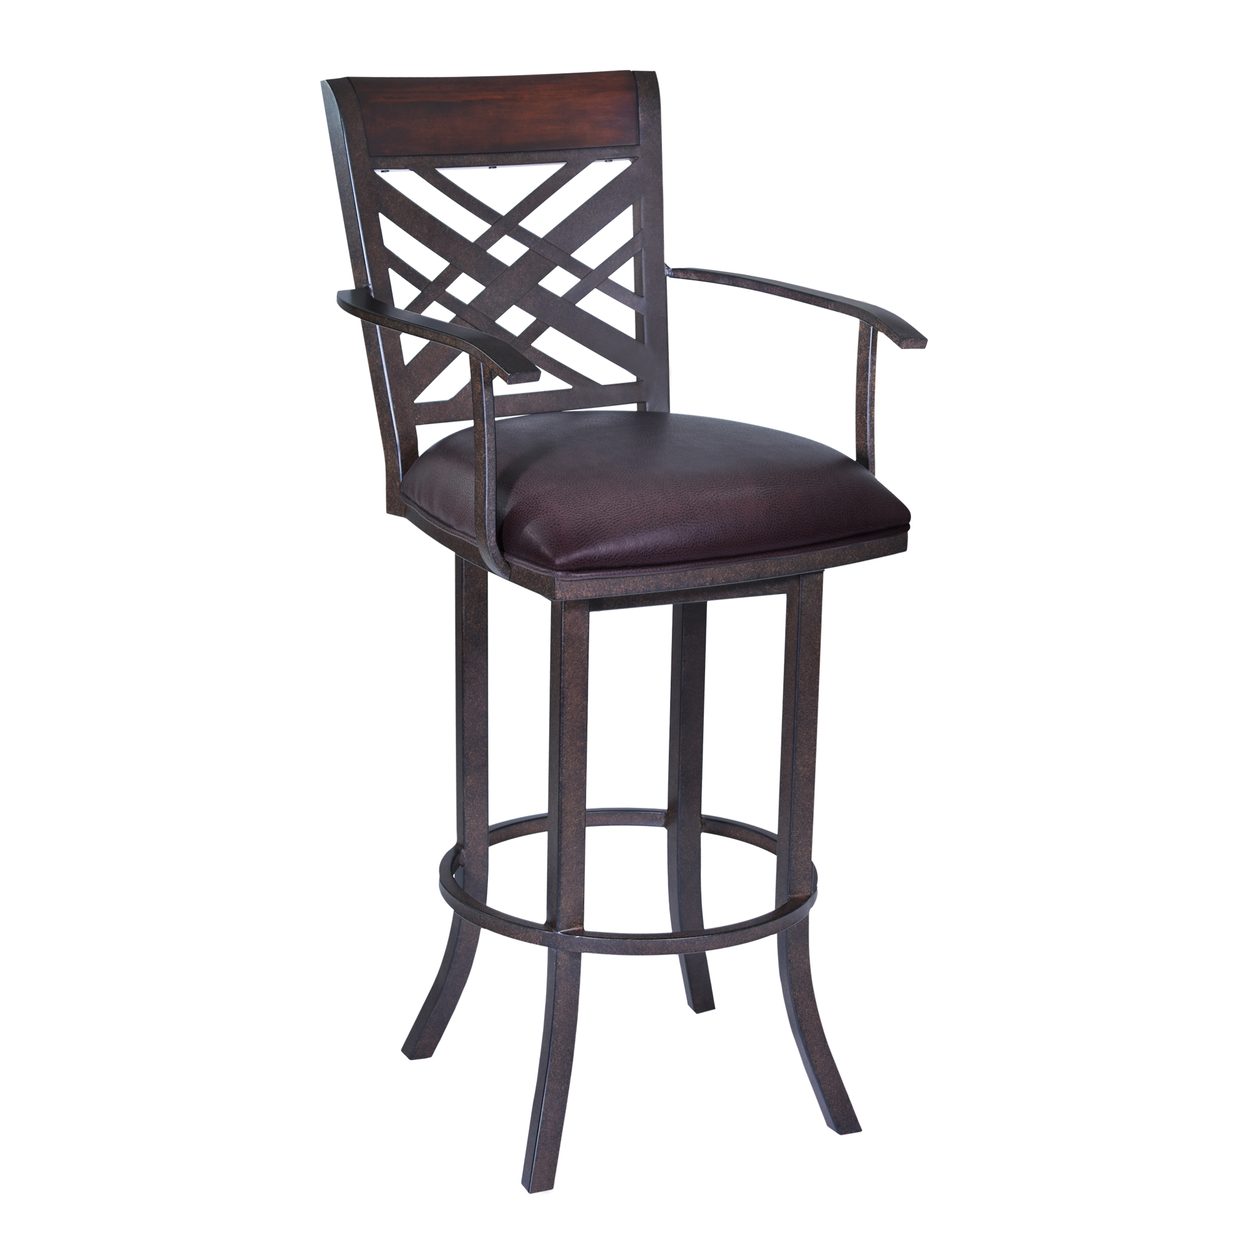 26 Inch Metal Swivel Bar Stool With Armrests And Leatherette Seat, Brown- Saltoro Sherpi